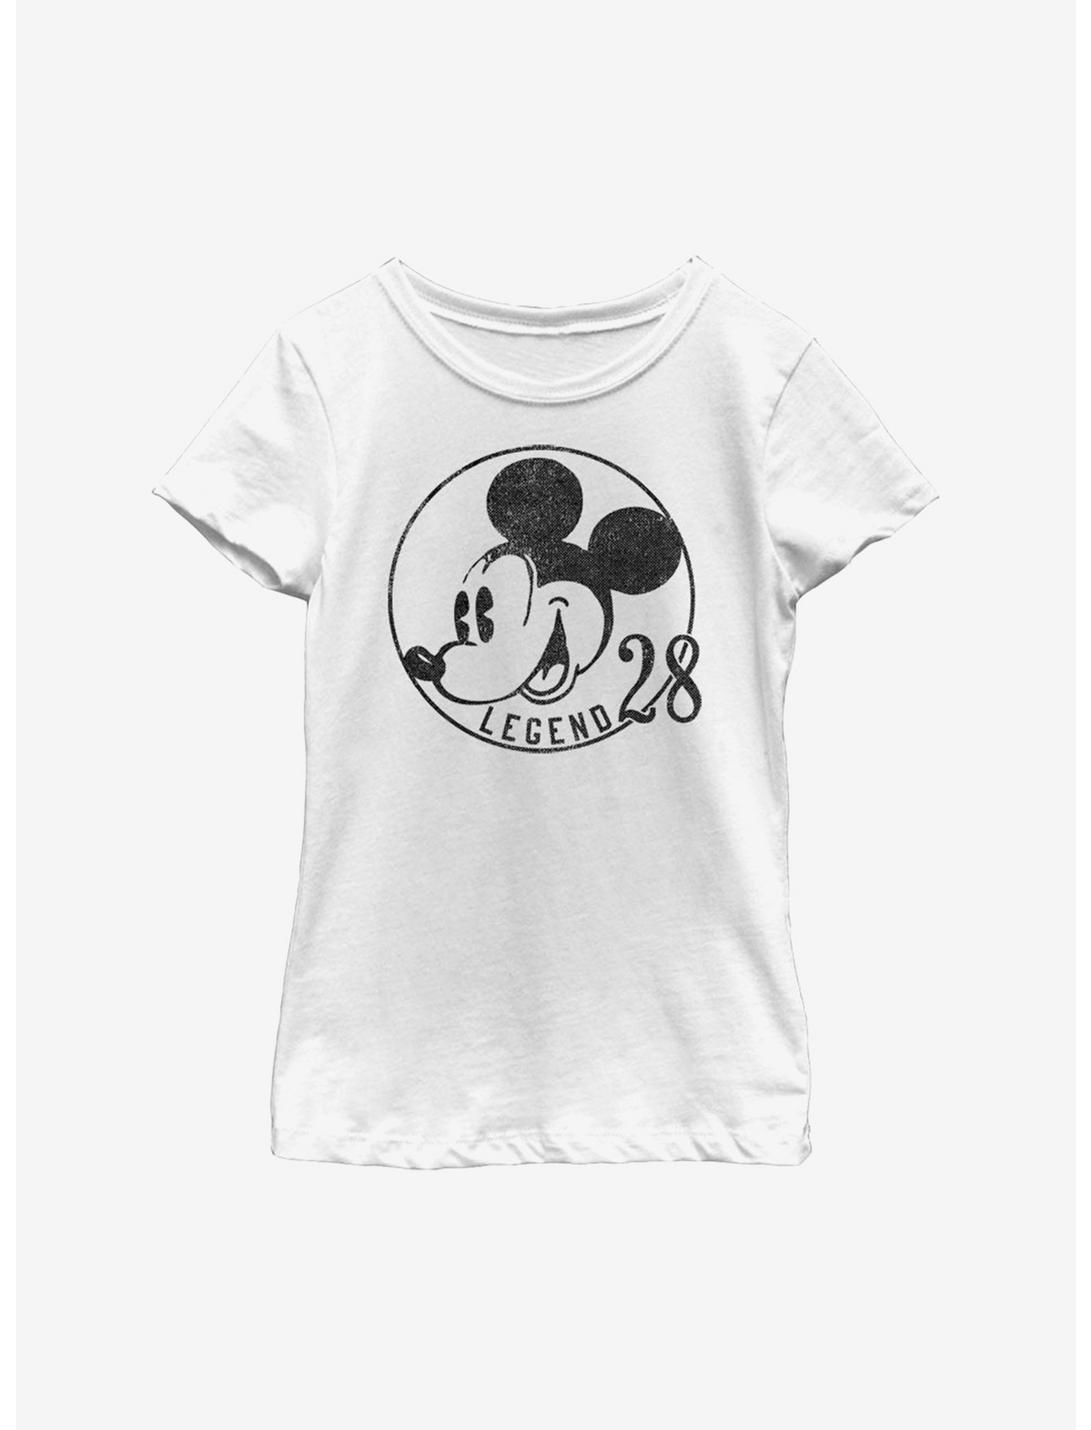 Disney Mickey Mouse 1928 Legend Youth Girls T-Shirt, WHITE, hi-res